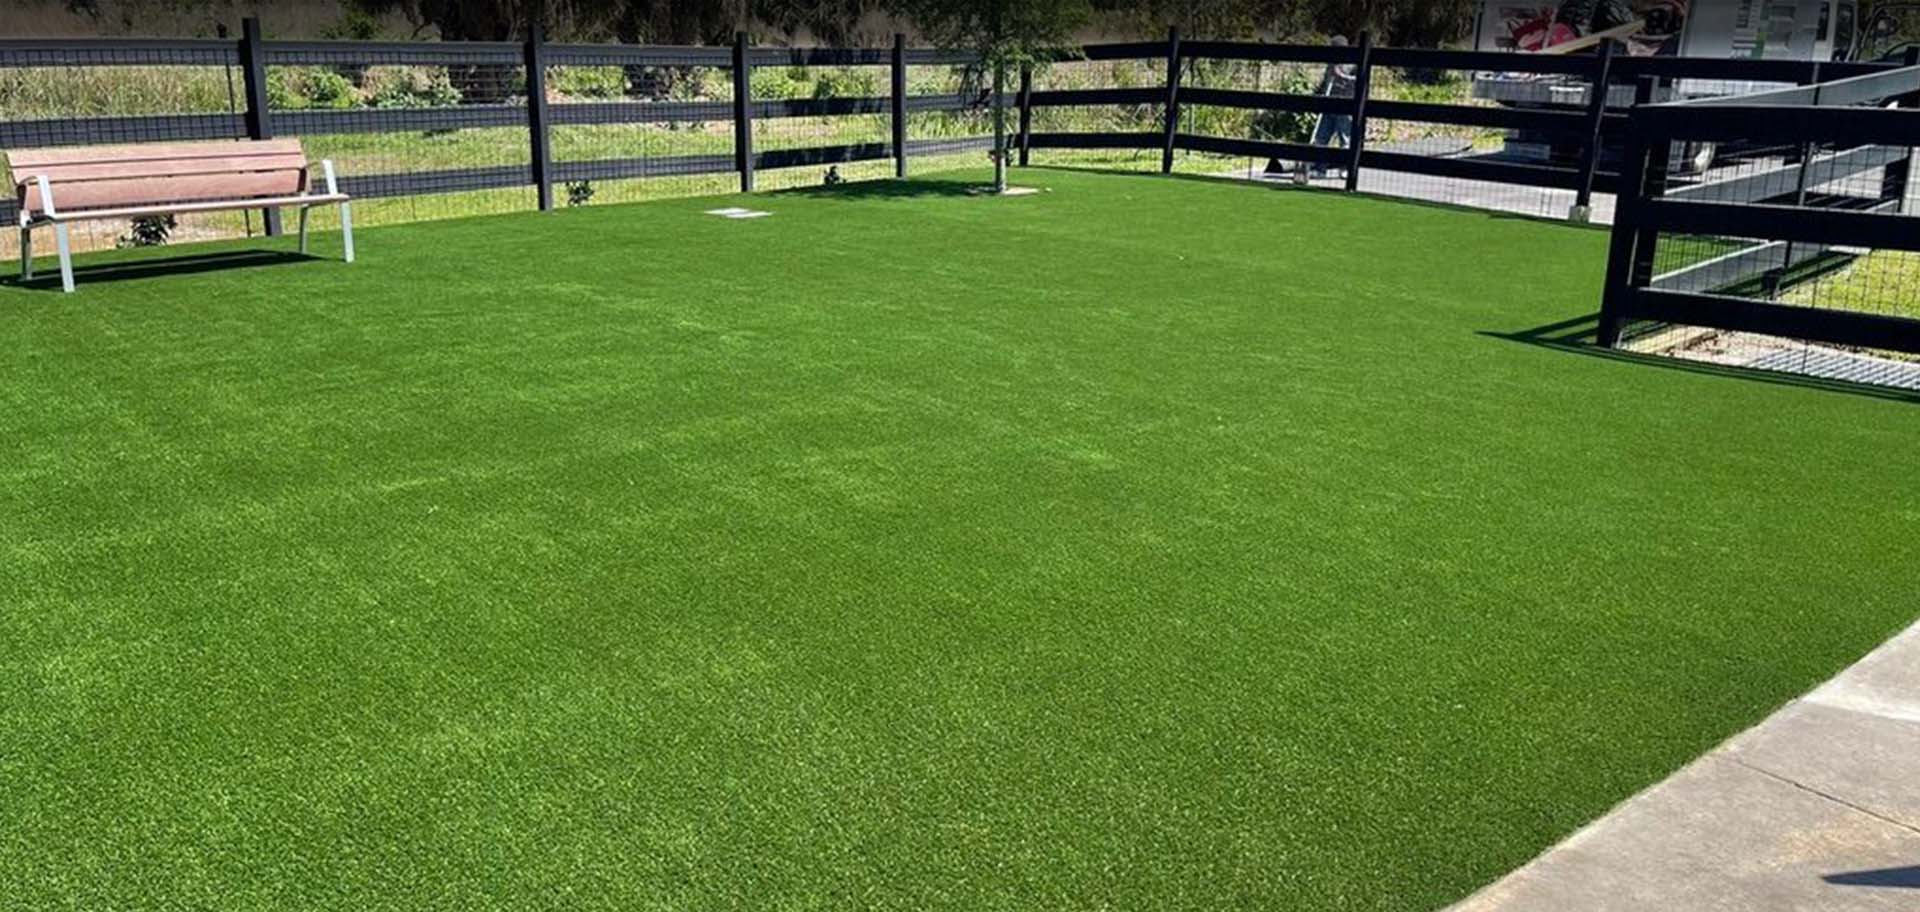 West Palm Beach Artificial Grass Installation, Synthetic Turf Installation and Putting Green Installation